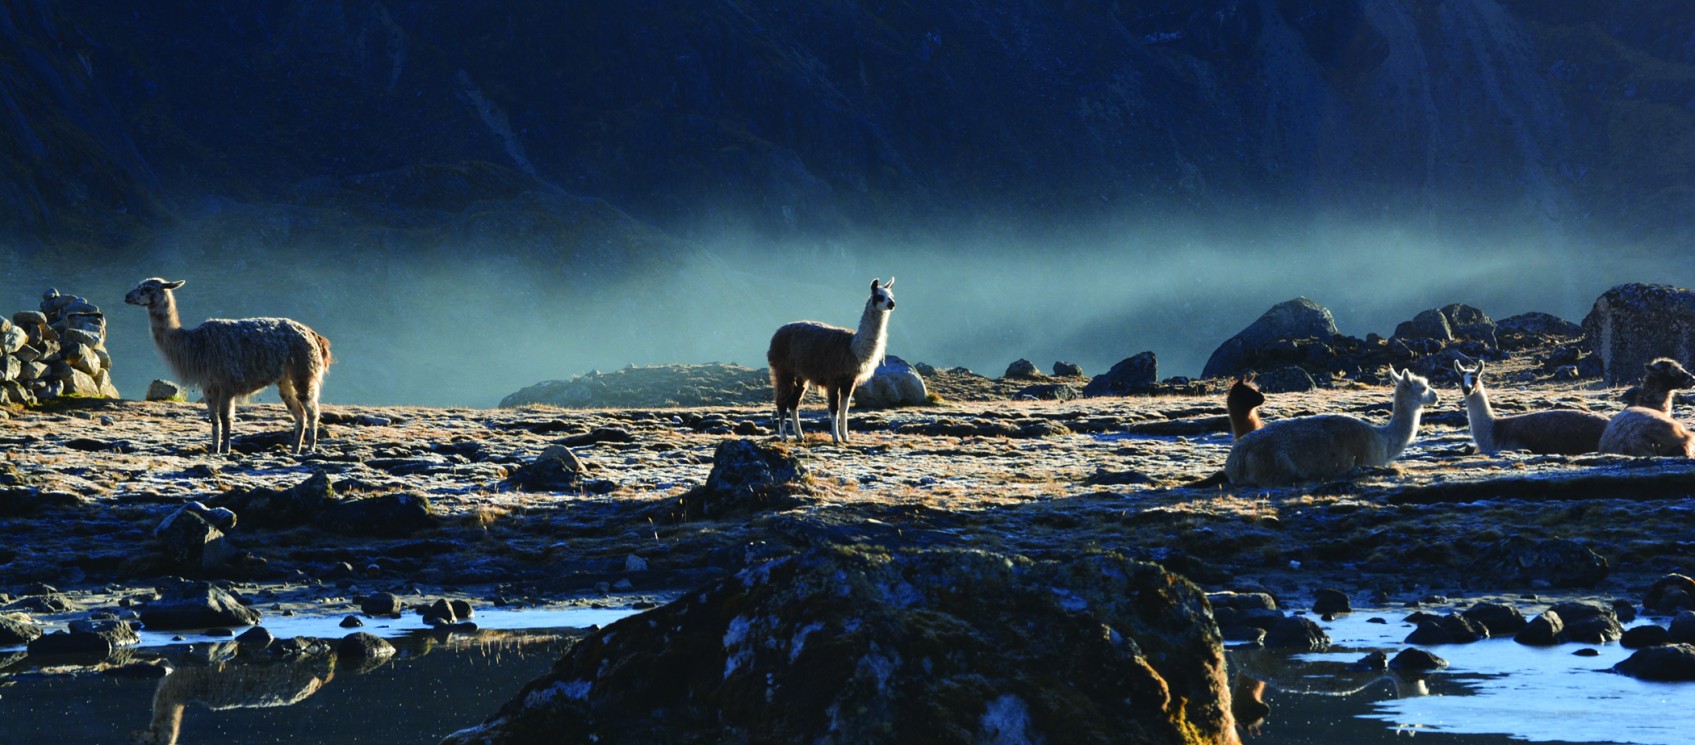 Small heard of llamas resting outside in mountains - Peru Travel Abroad Program